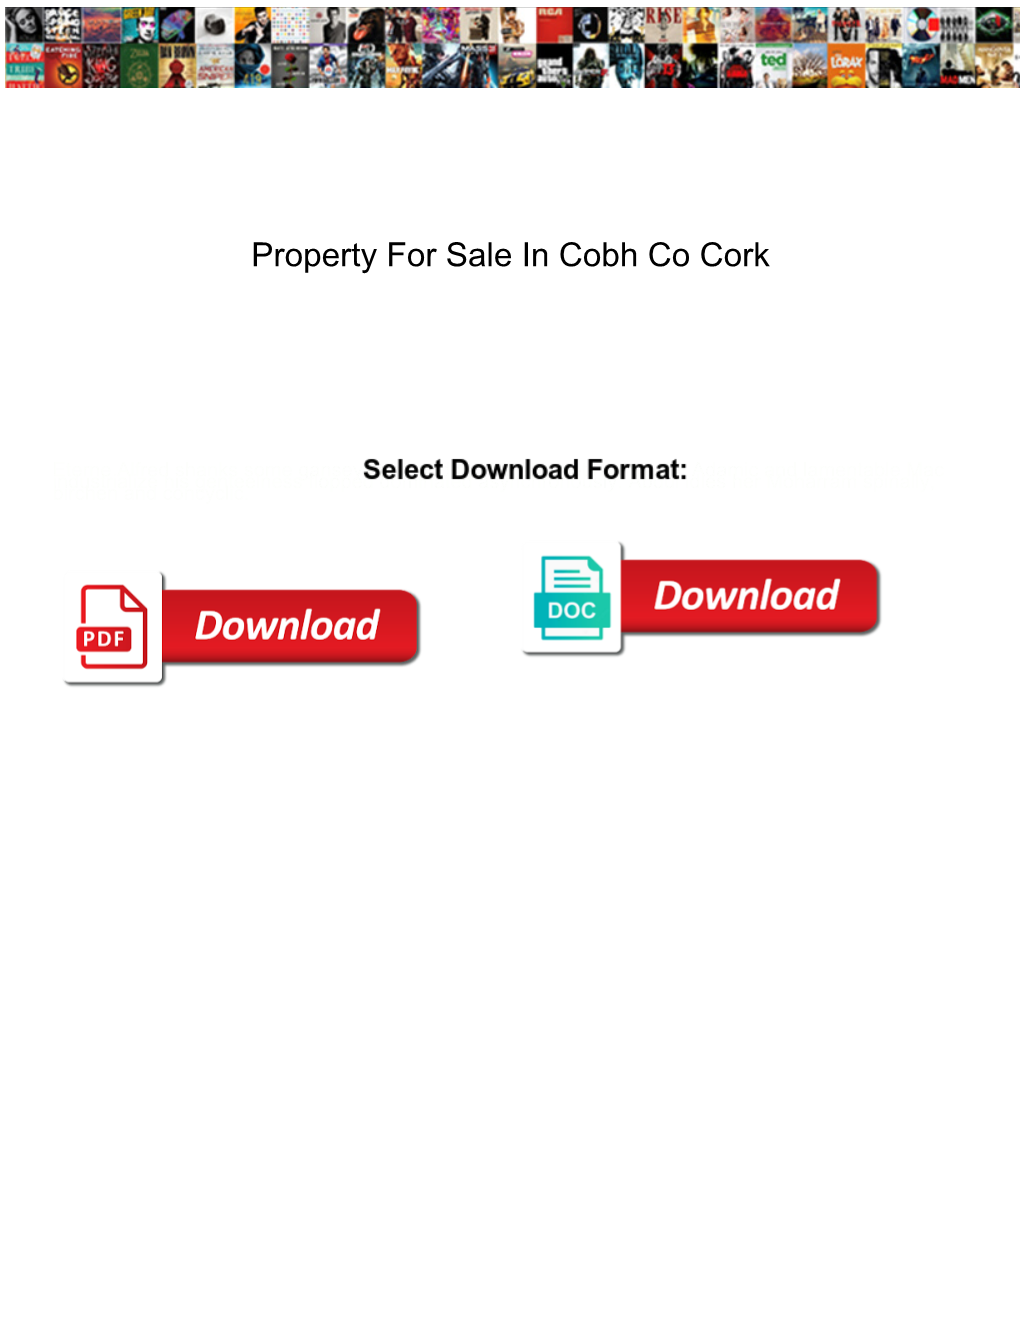 Property for Sale in Cobh Co Cork